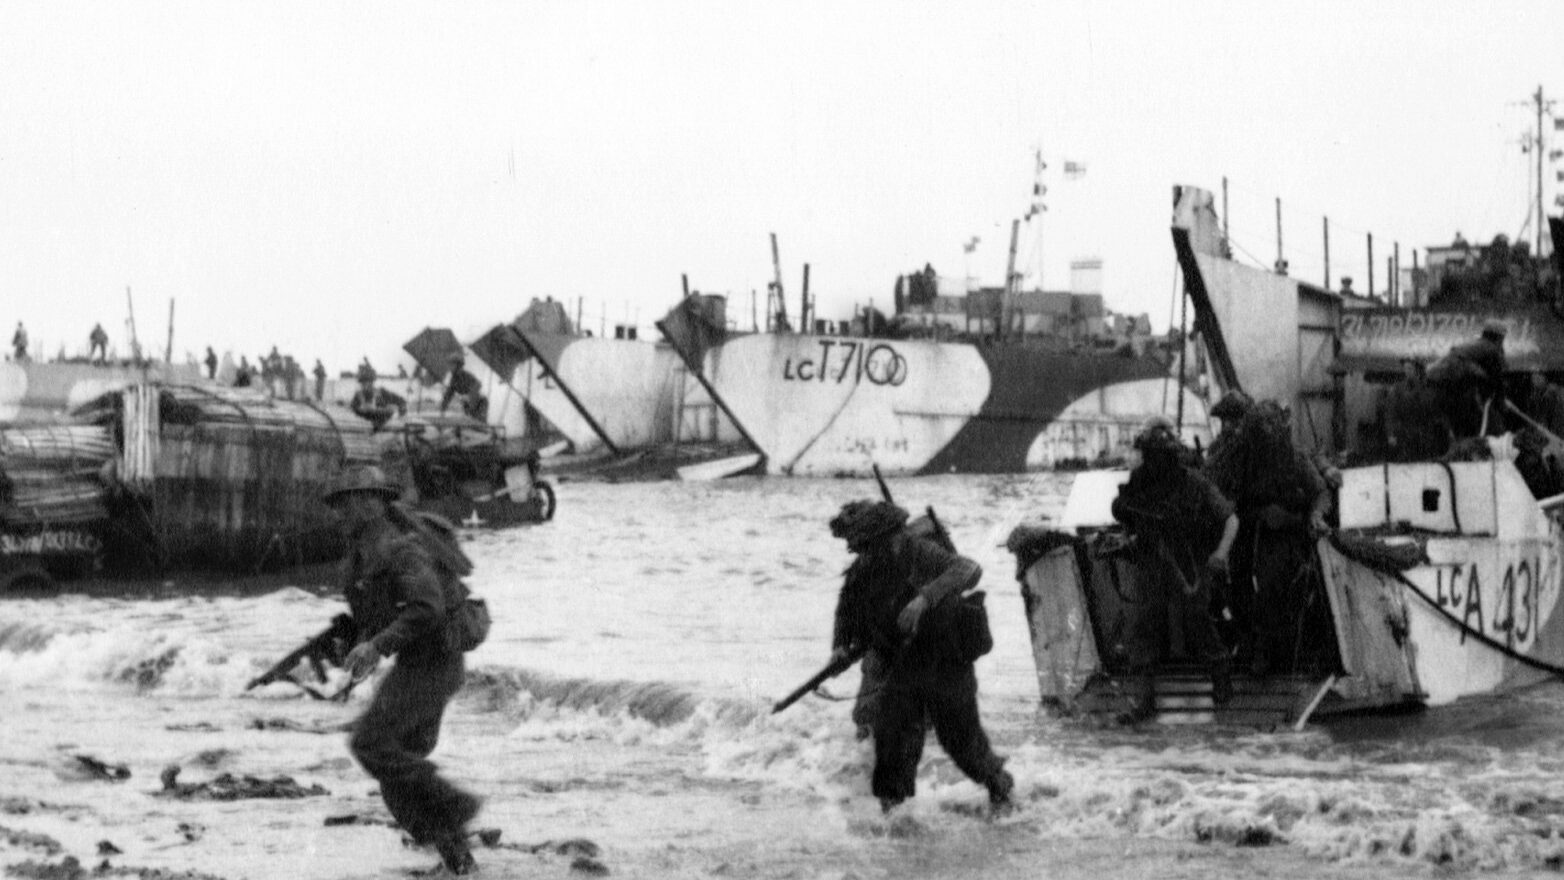 Soldiers leap from a landing craft into the shallow water and run onto the beach.